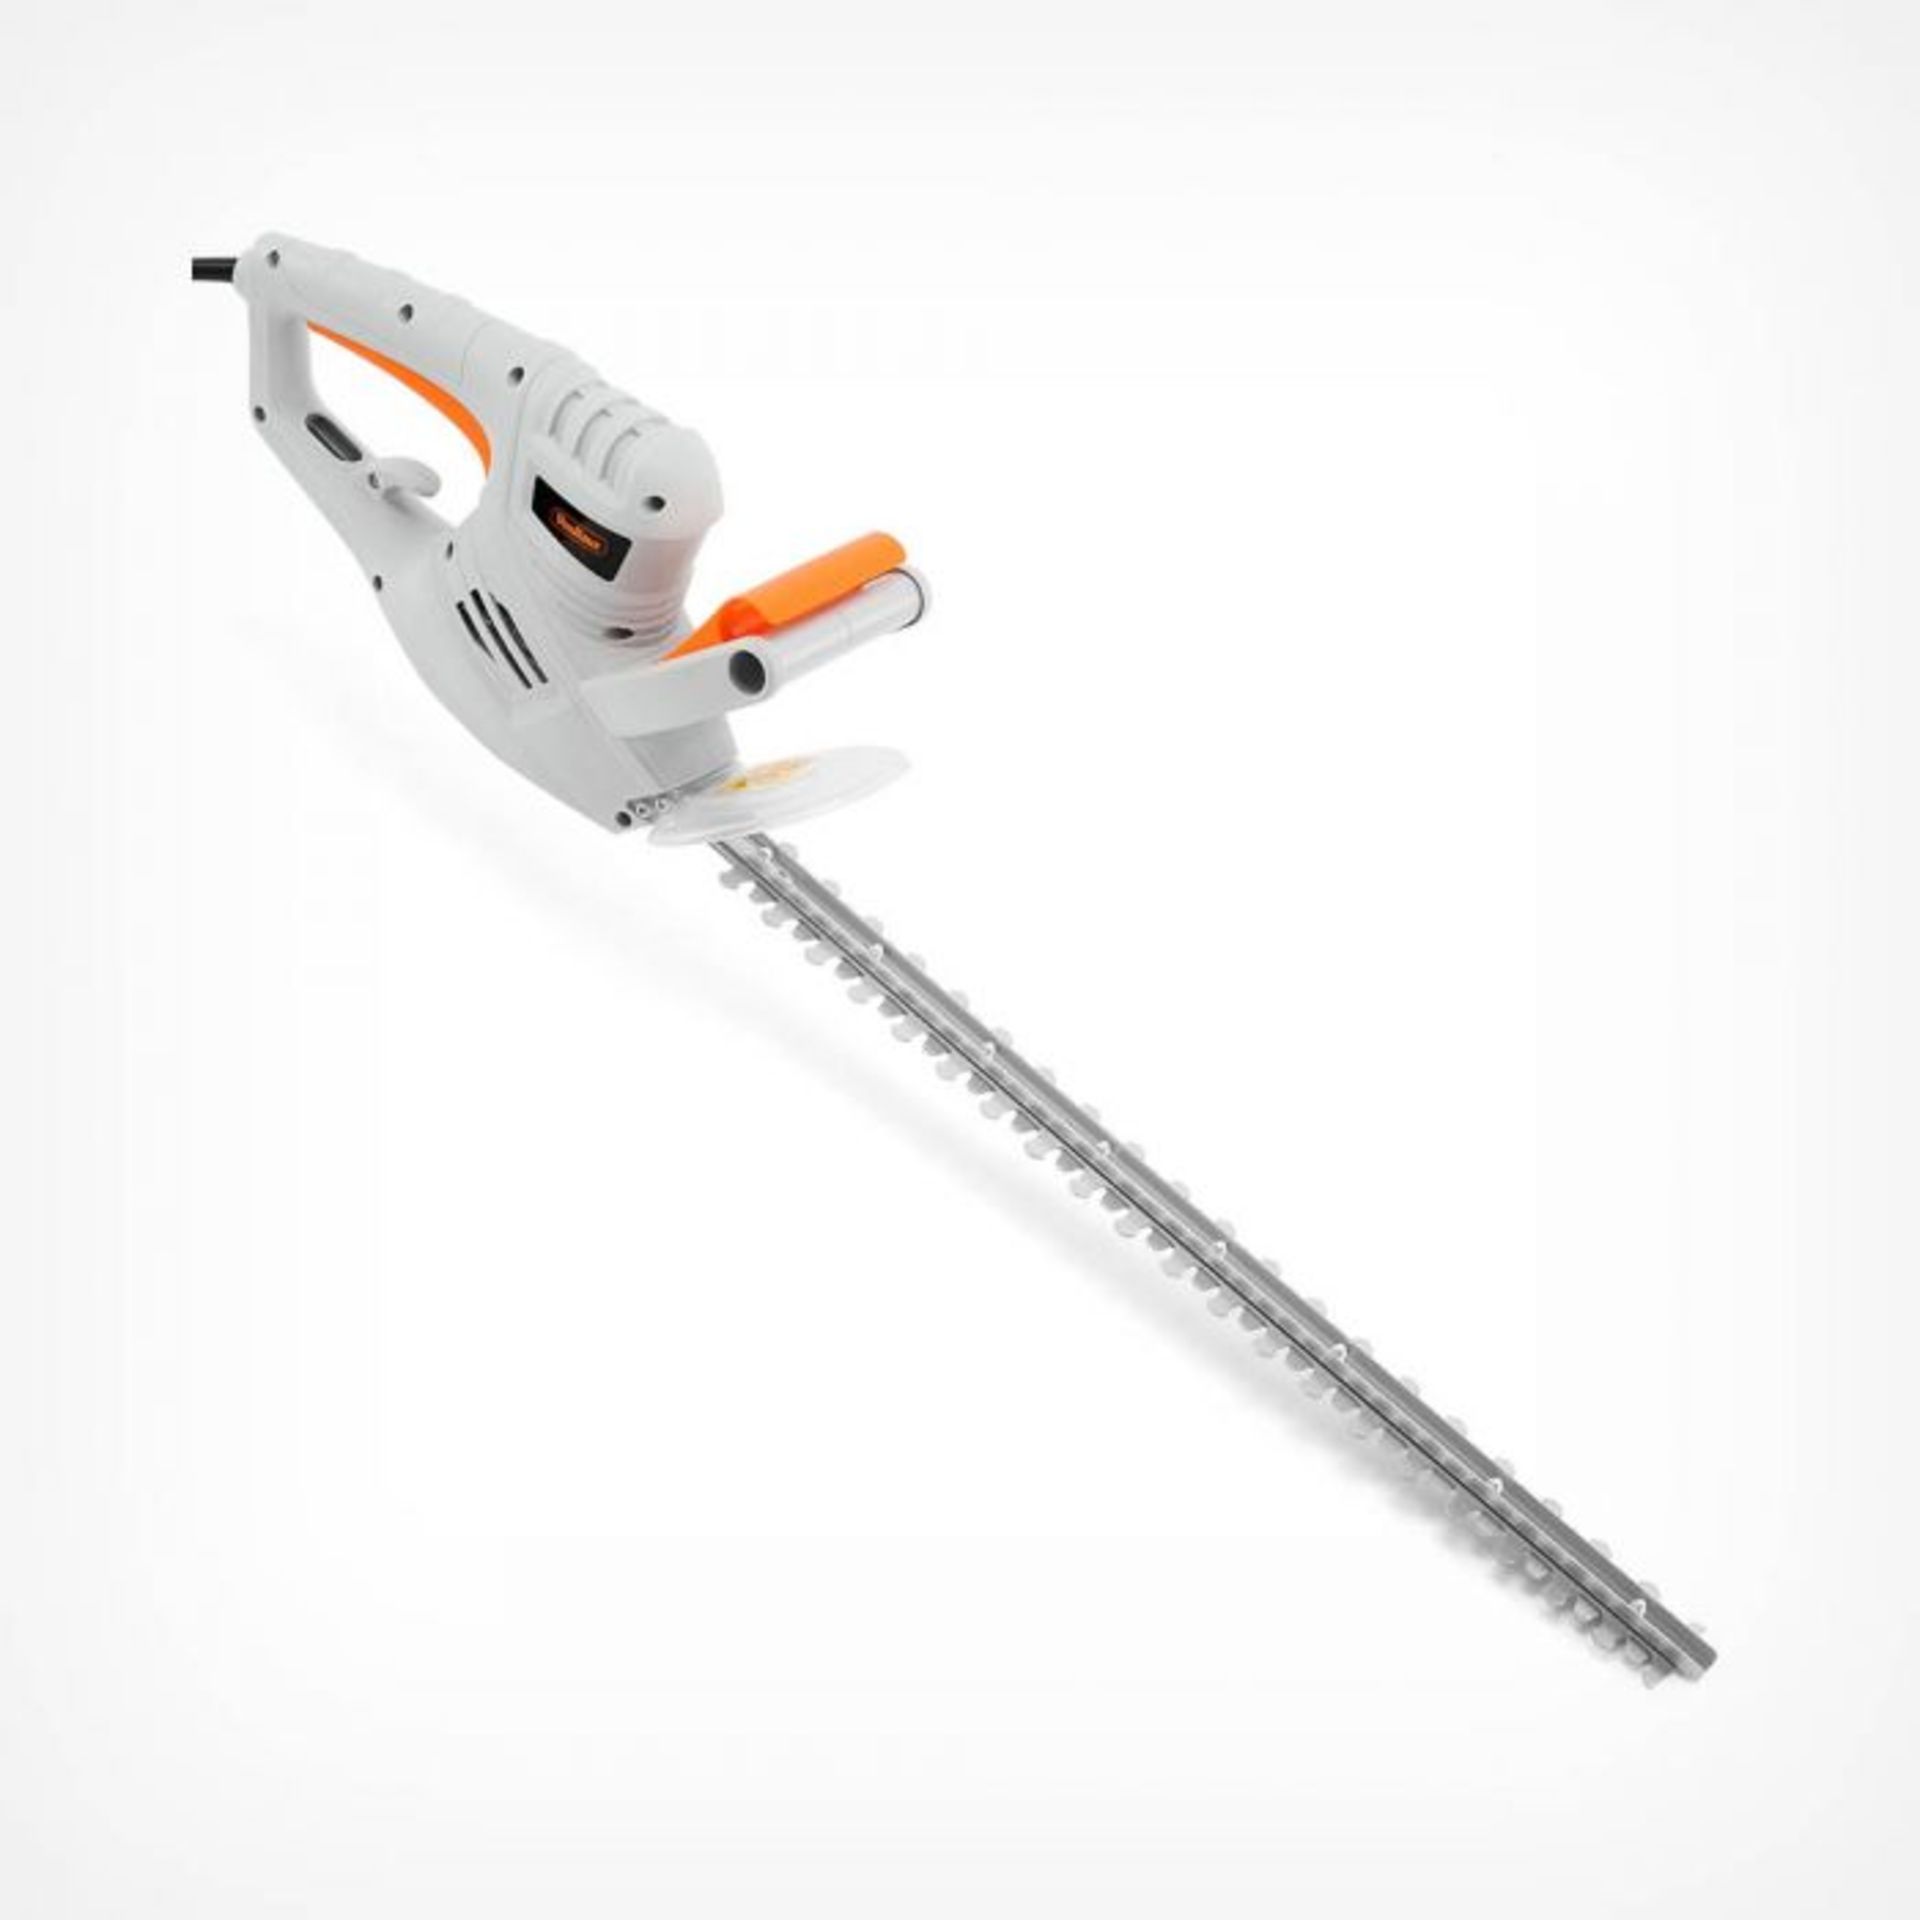 550W Hedge Trimmer. Don’t waste your time and energy enduring manual hedge trimming. This luxury